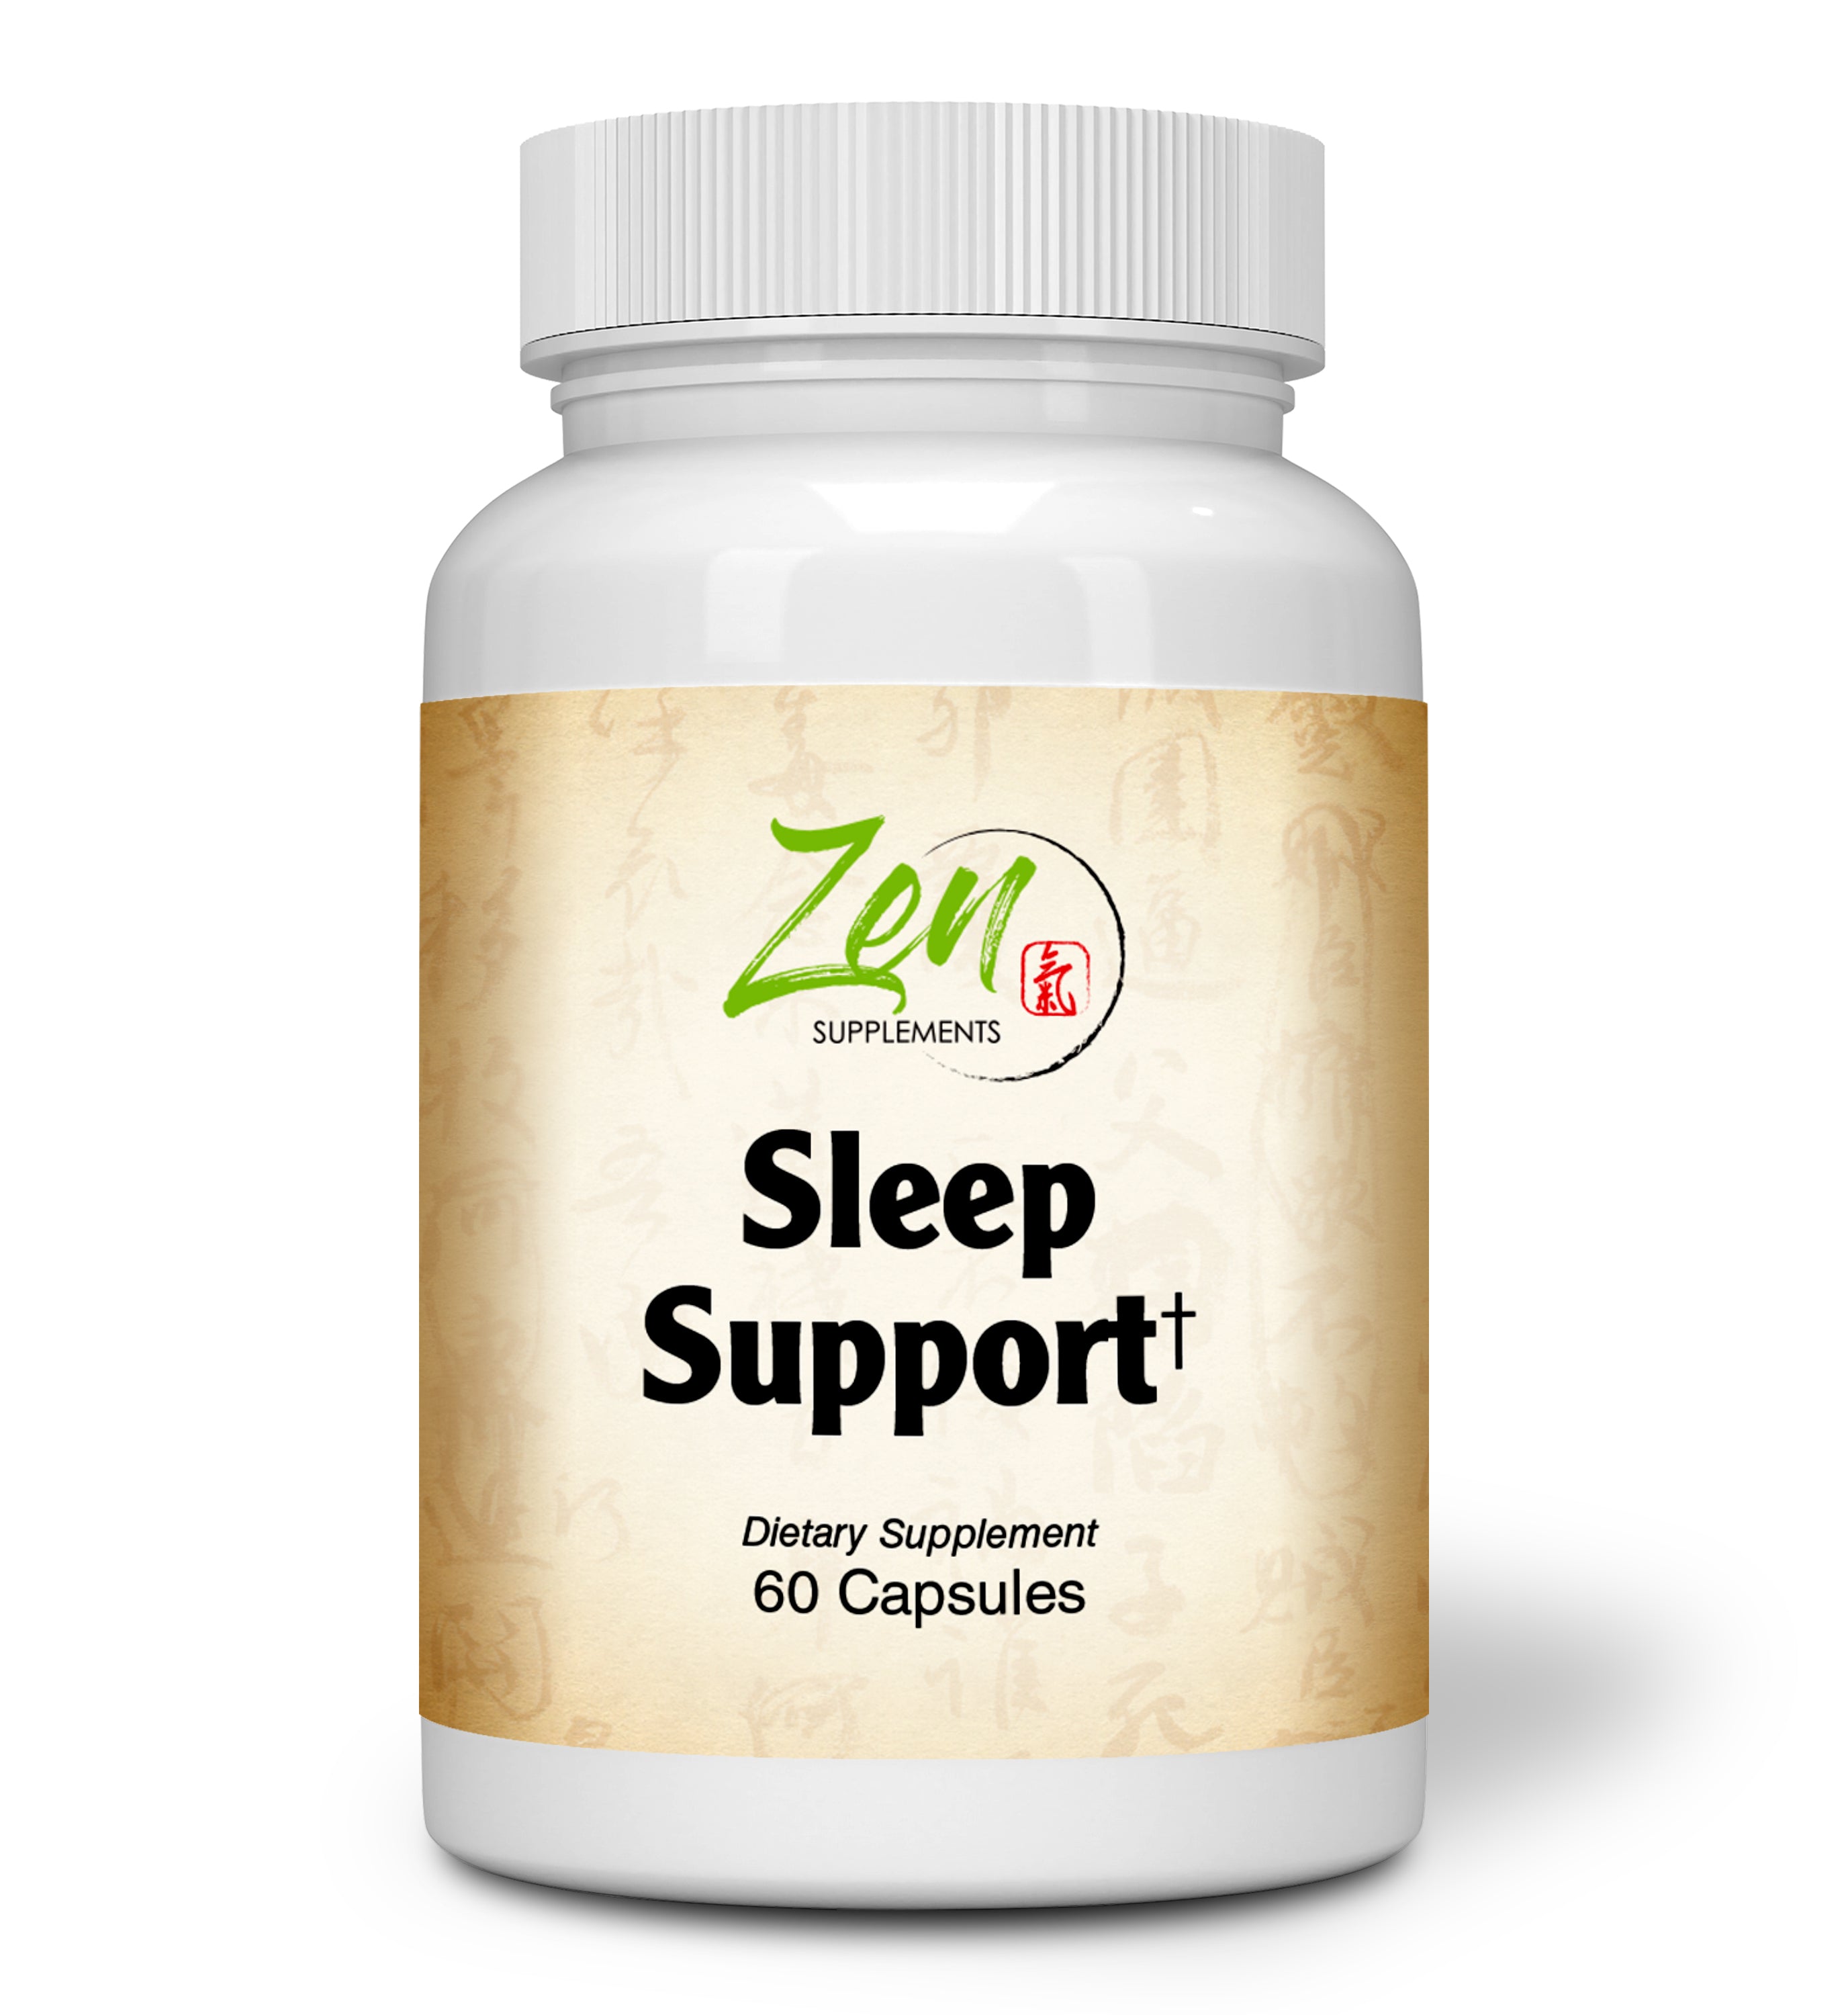 Zen Supplements - Saw Palmetto & Pygeum Plus - Prostate Support Supplement for Prostate & Urinary Tract Health Including Frequent Urination, Beta-Sitosterol Supports DHT Blocker for Hair Loss Prevention 60-Softgel